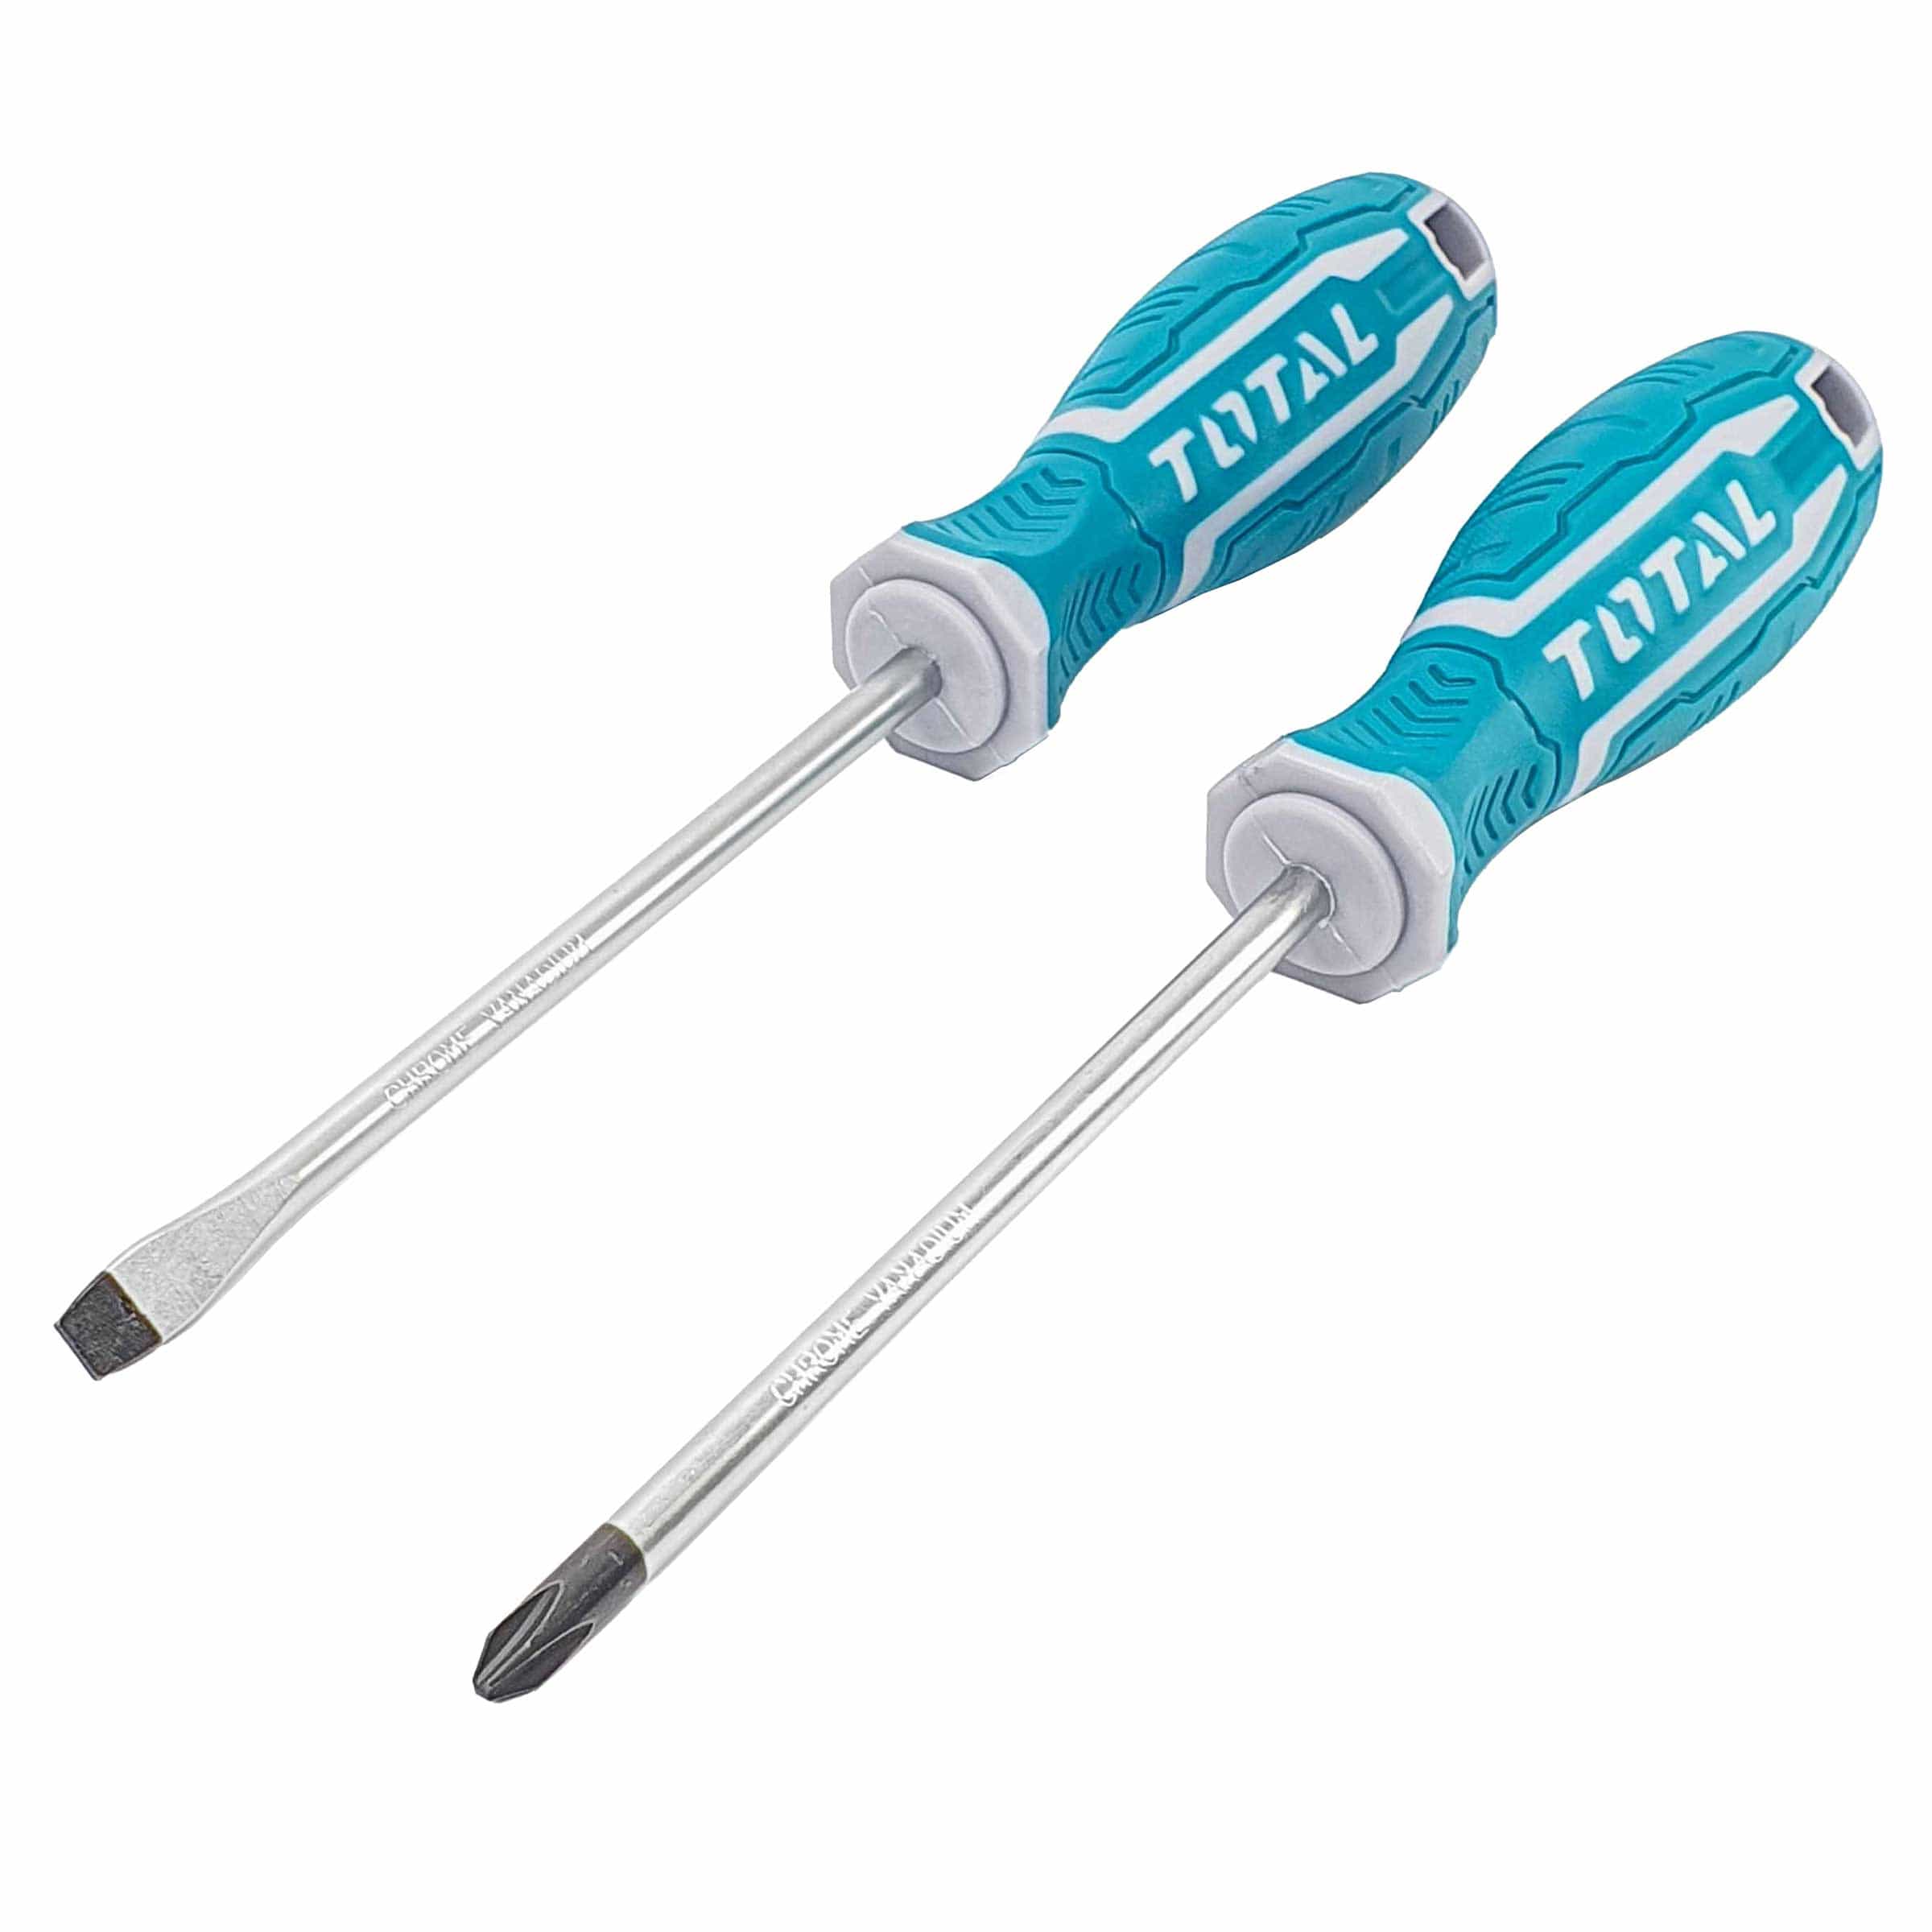 Total 2 Pieces Screwdriver Set - THT250201 | Supply Master Accra, Ghana Screwdrivers Buy Tools hardware Building materials